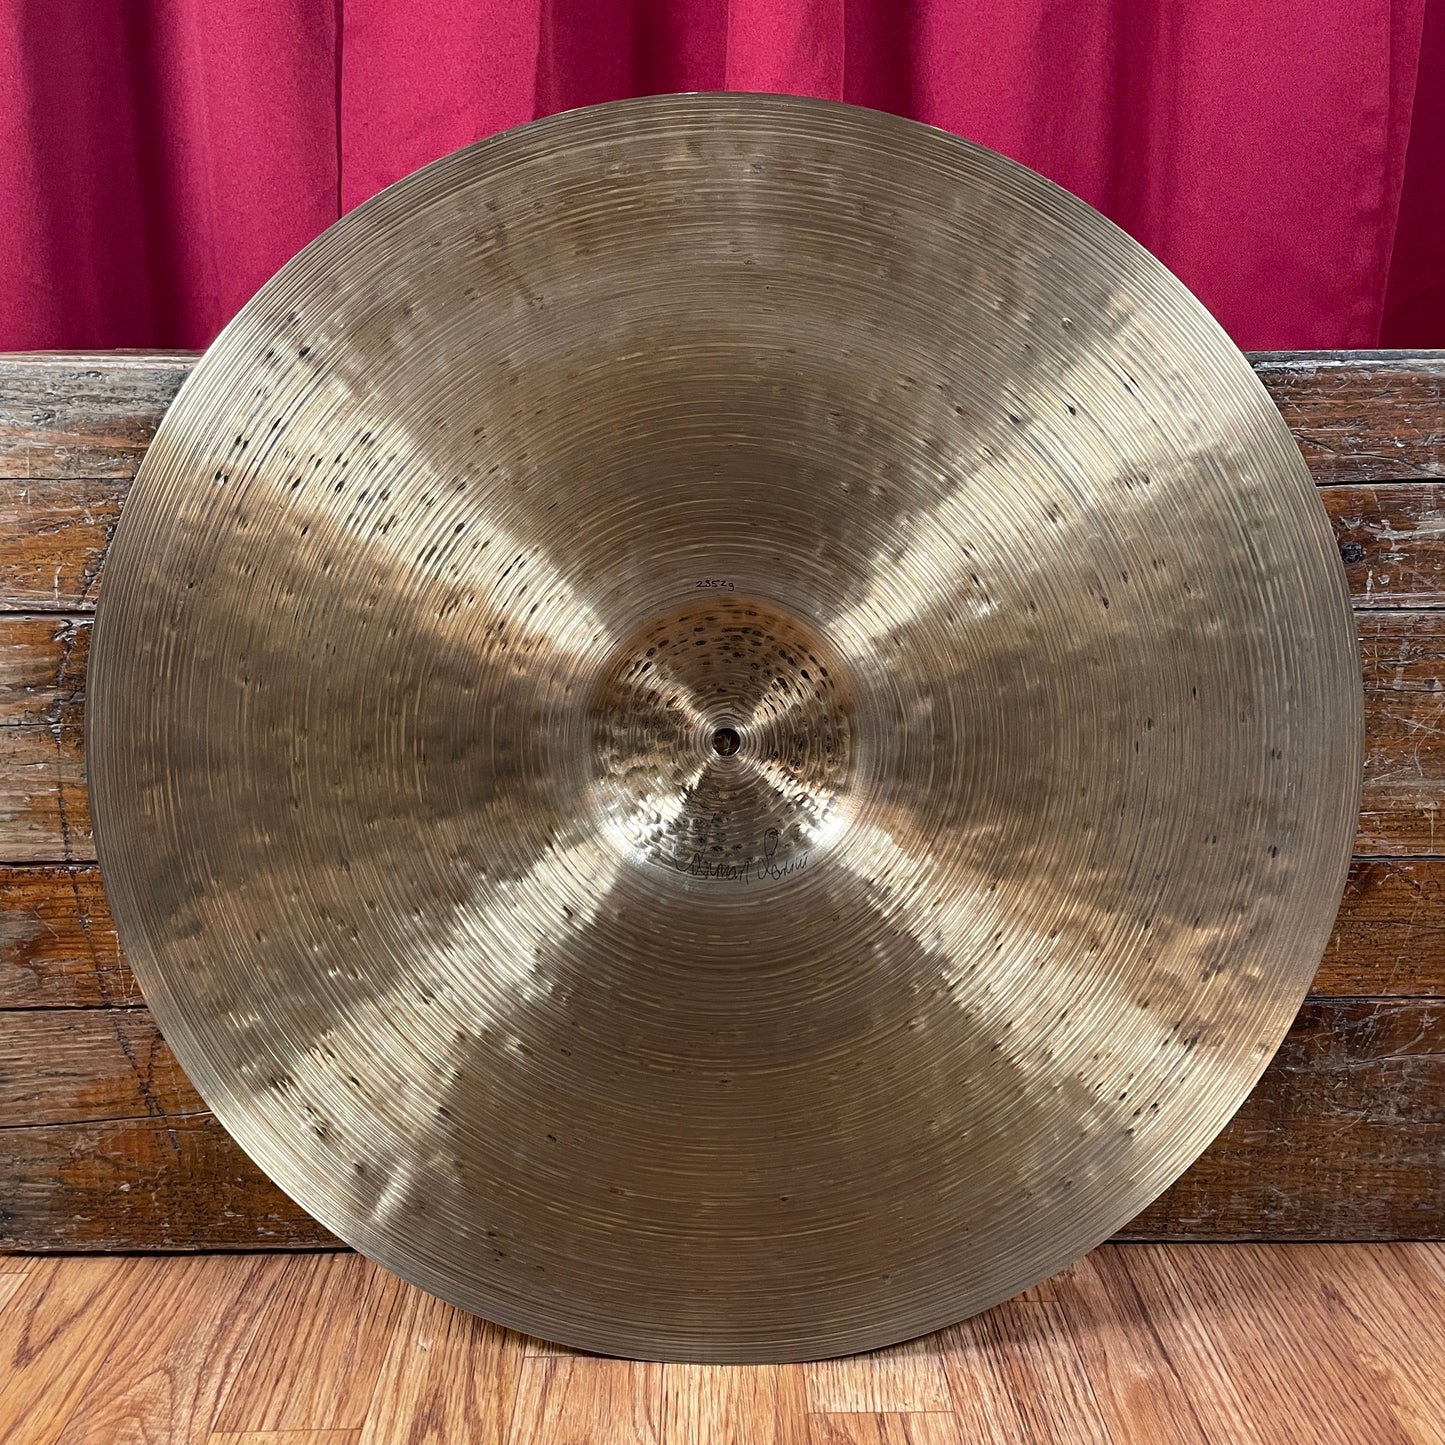 22" Istanbul Agop 30th Anniversary Ride Cymbal 2352g *Video Demo*